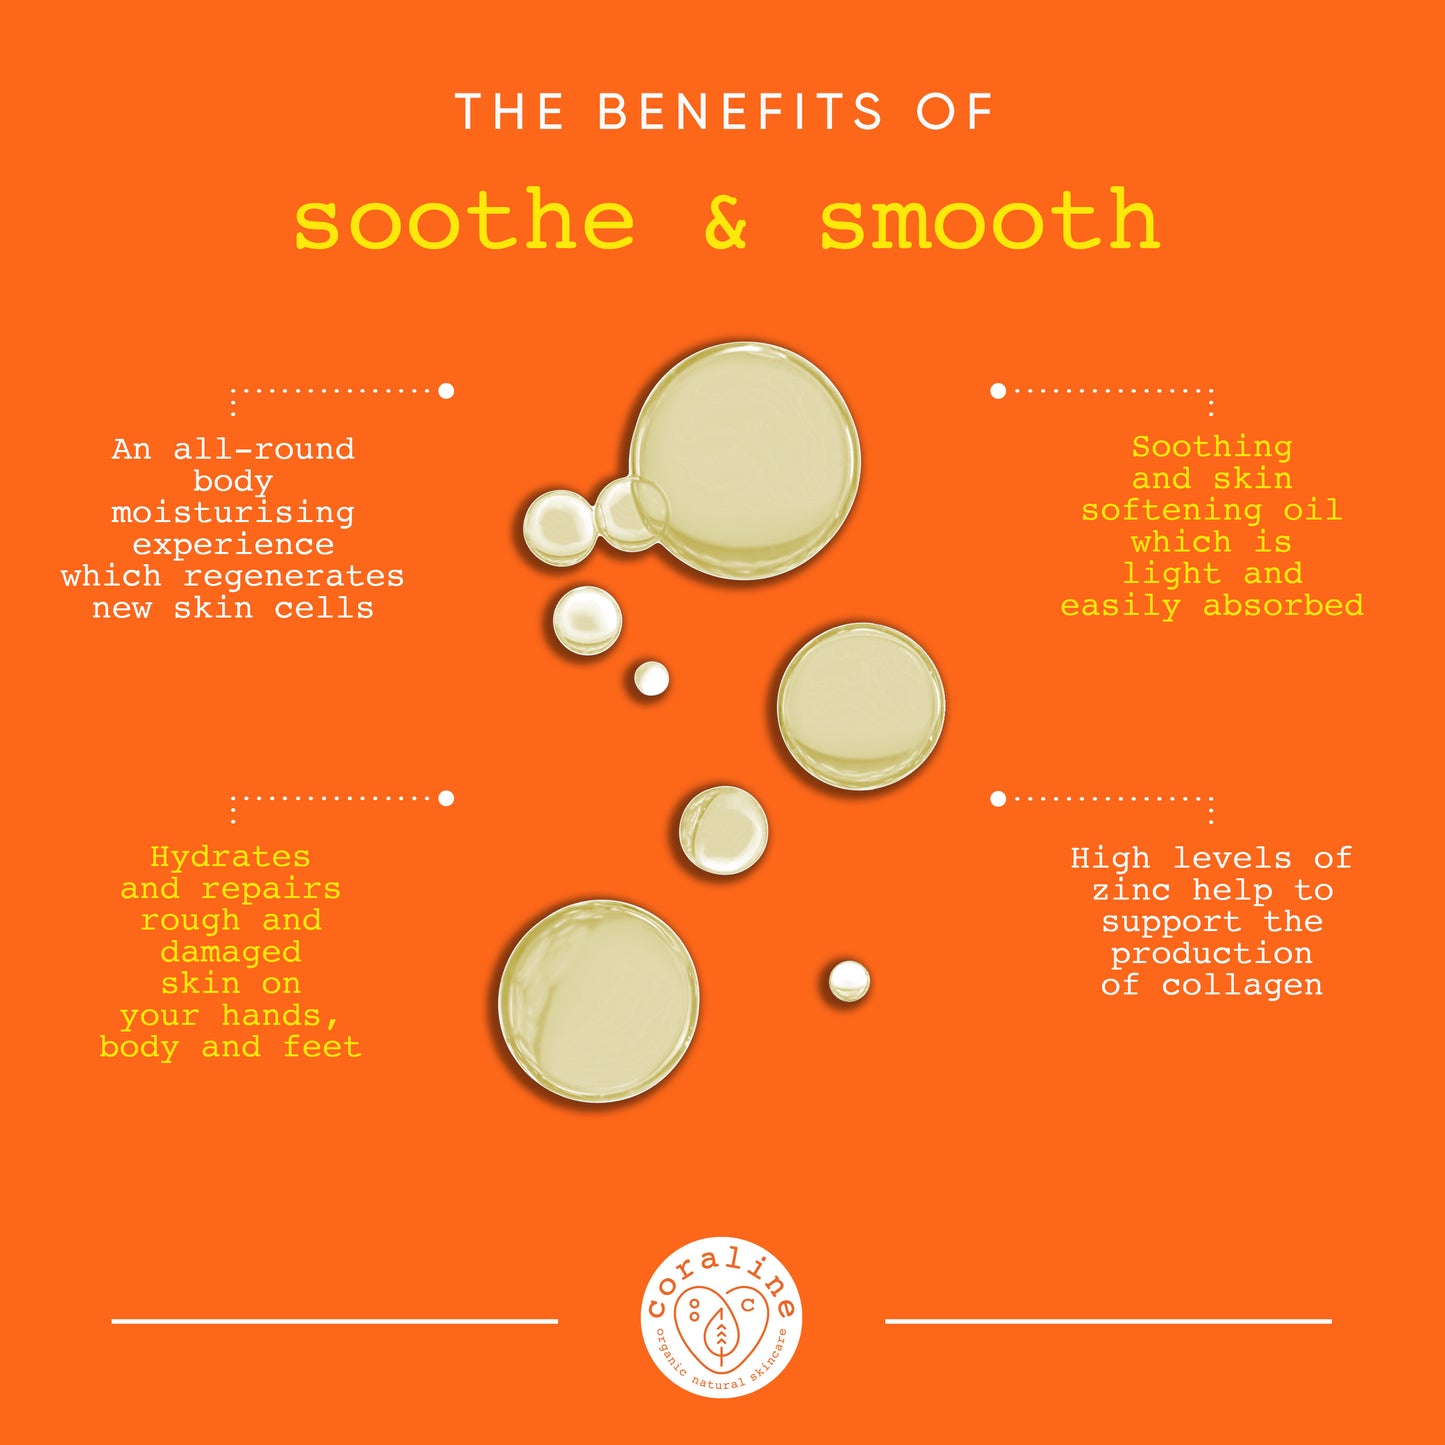 Infographic: "The Benefits of Soothe & Smooth". An orange background features circular cream coloured droplets of oil. It displays various benefits of a soothing and skin-softening oil. The benefits include moisturizing, cell regeneration, hydration, repair of rough skin, and supporting collagen production.